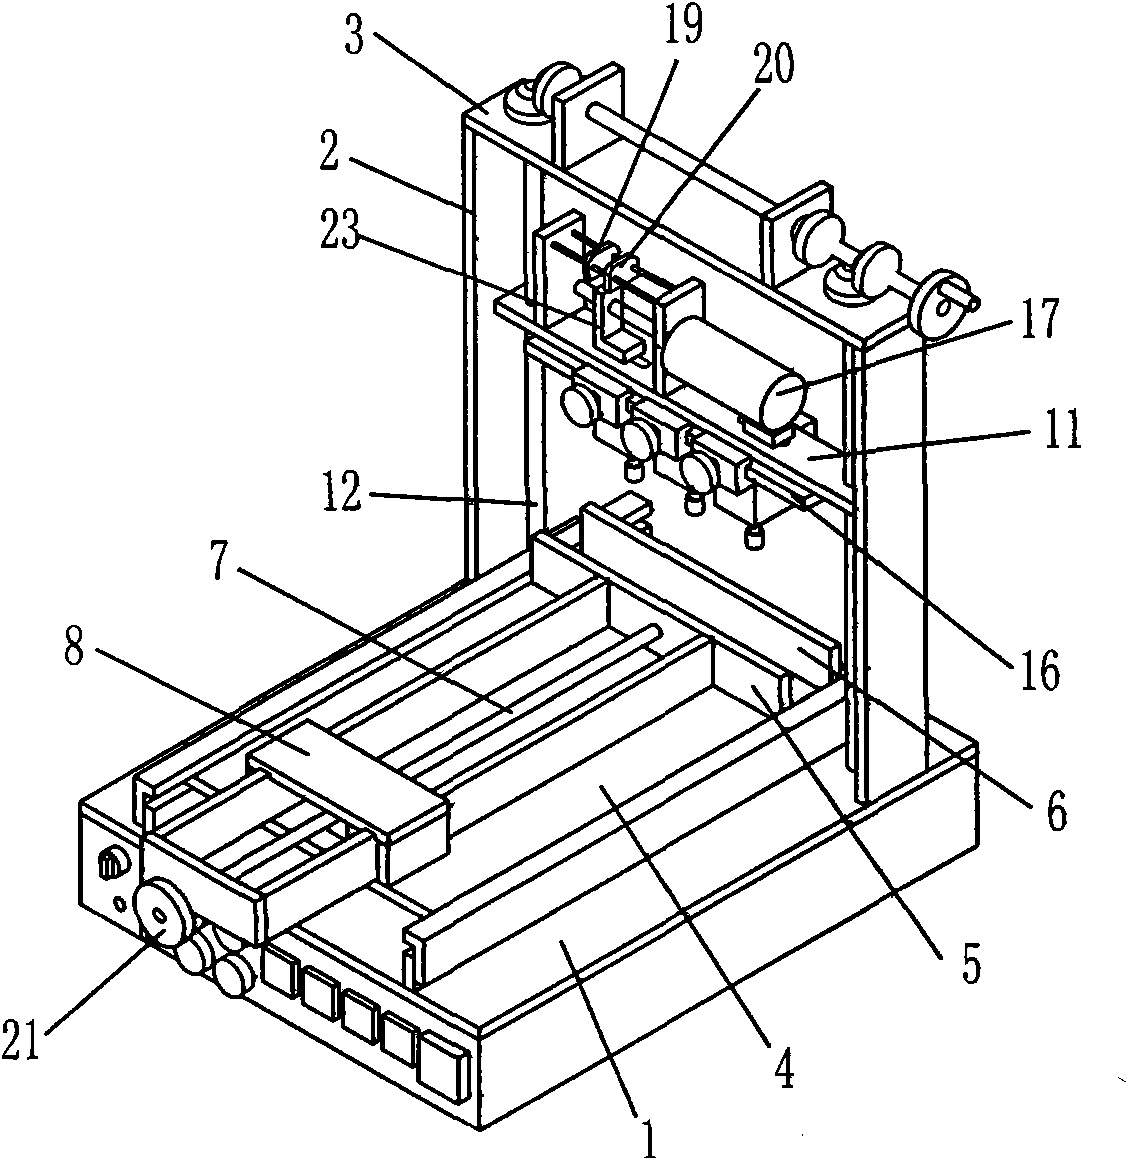 Ship-shaped switch fatigue test device